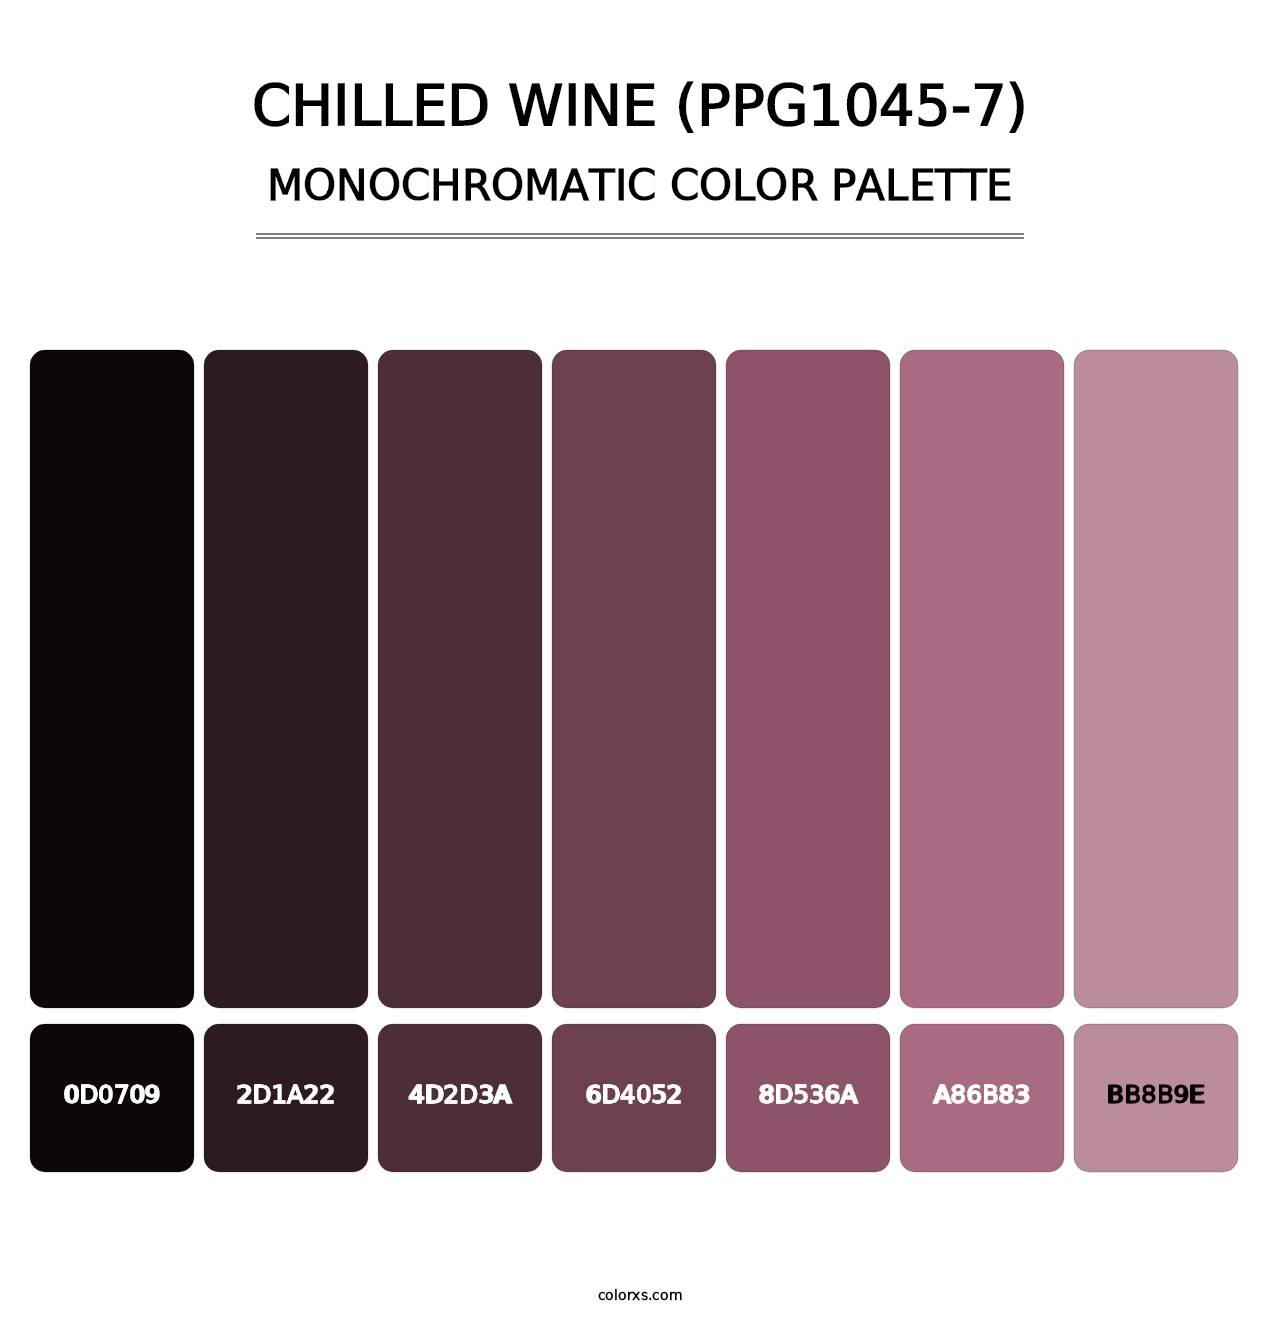 Chilled Wine (PPG1045-7) - Monochromatic Color Palette